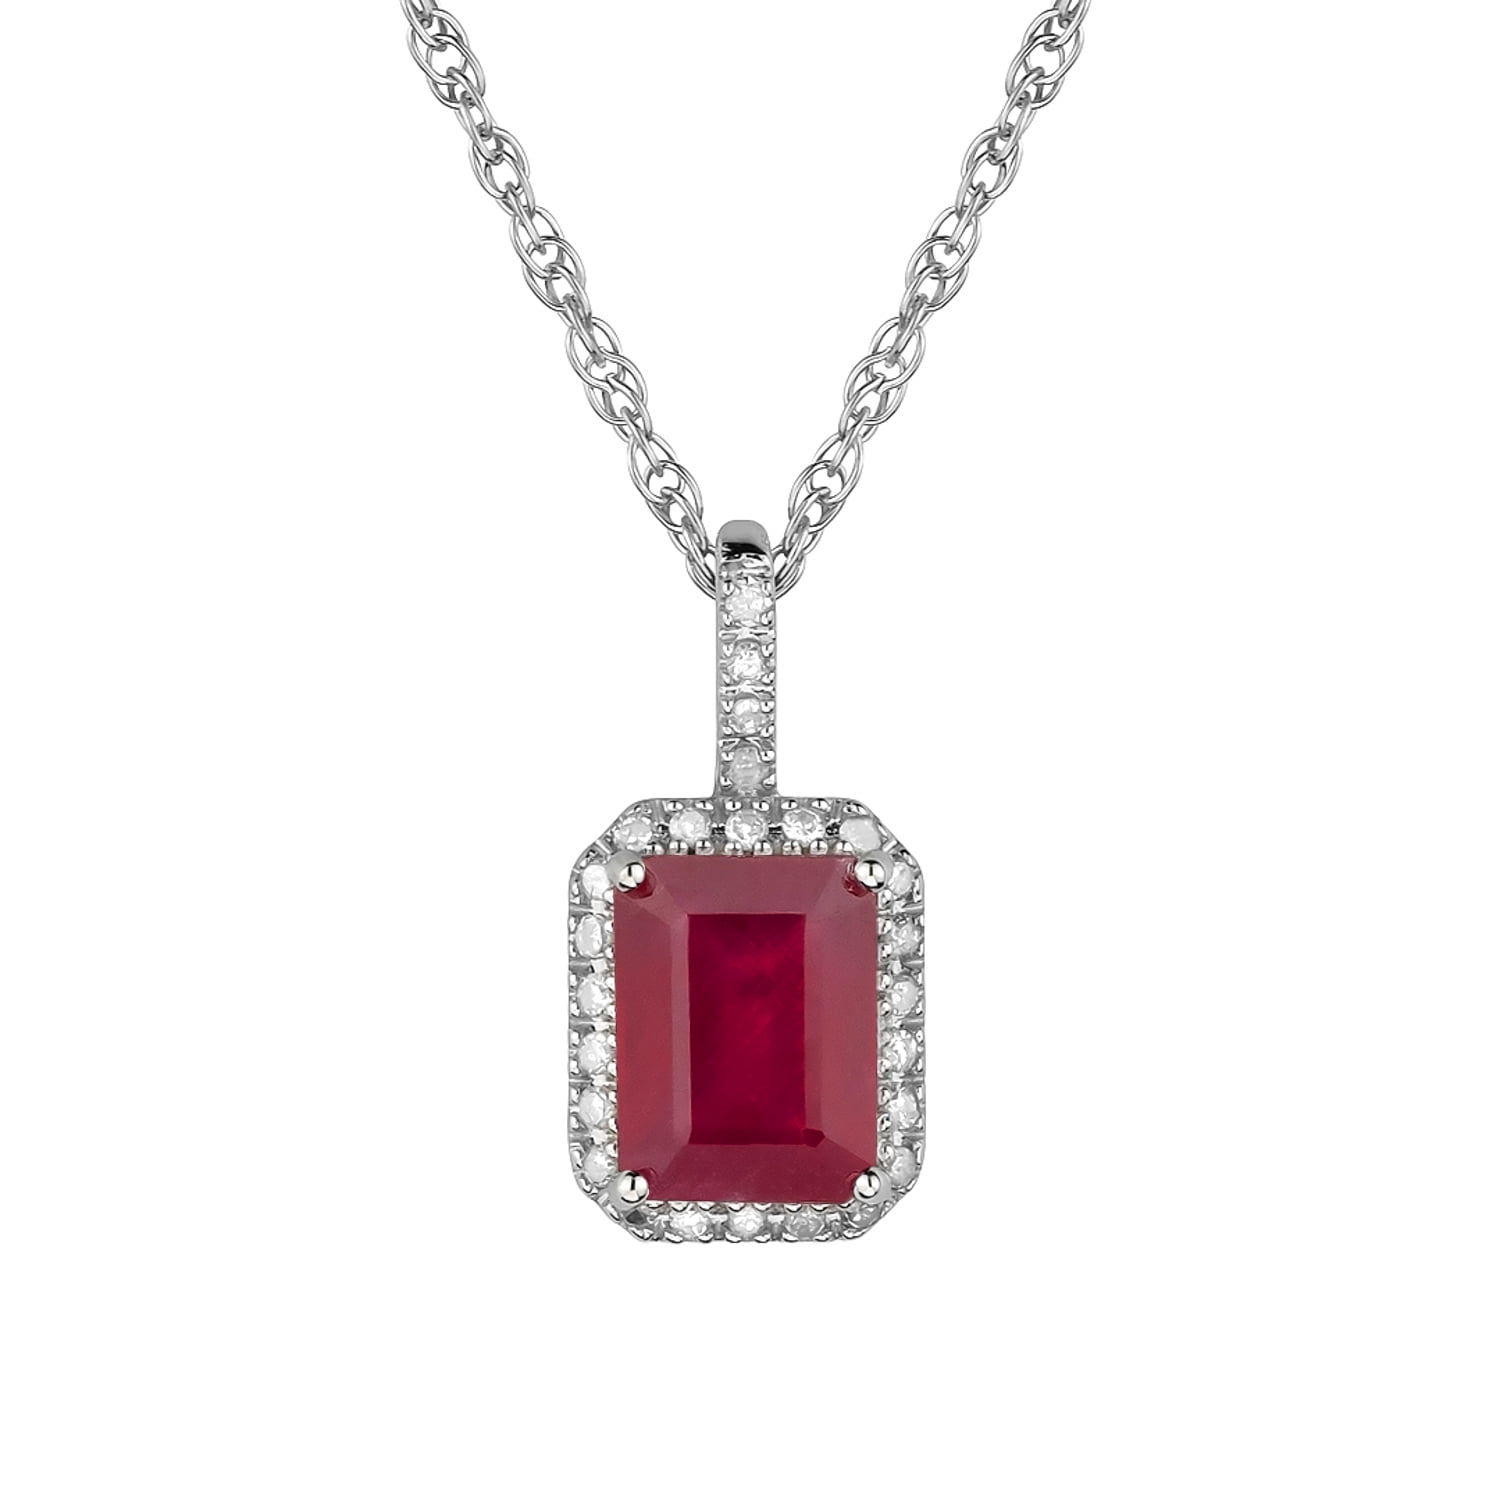 3Ct Emerald Cut Red Ruby And Diamond Halo Pendant Free Chain 14K White Gold Over